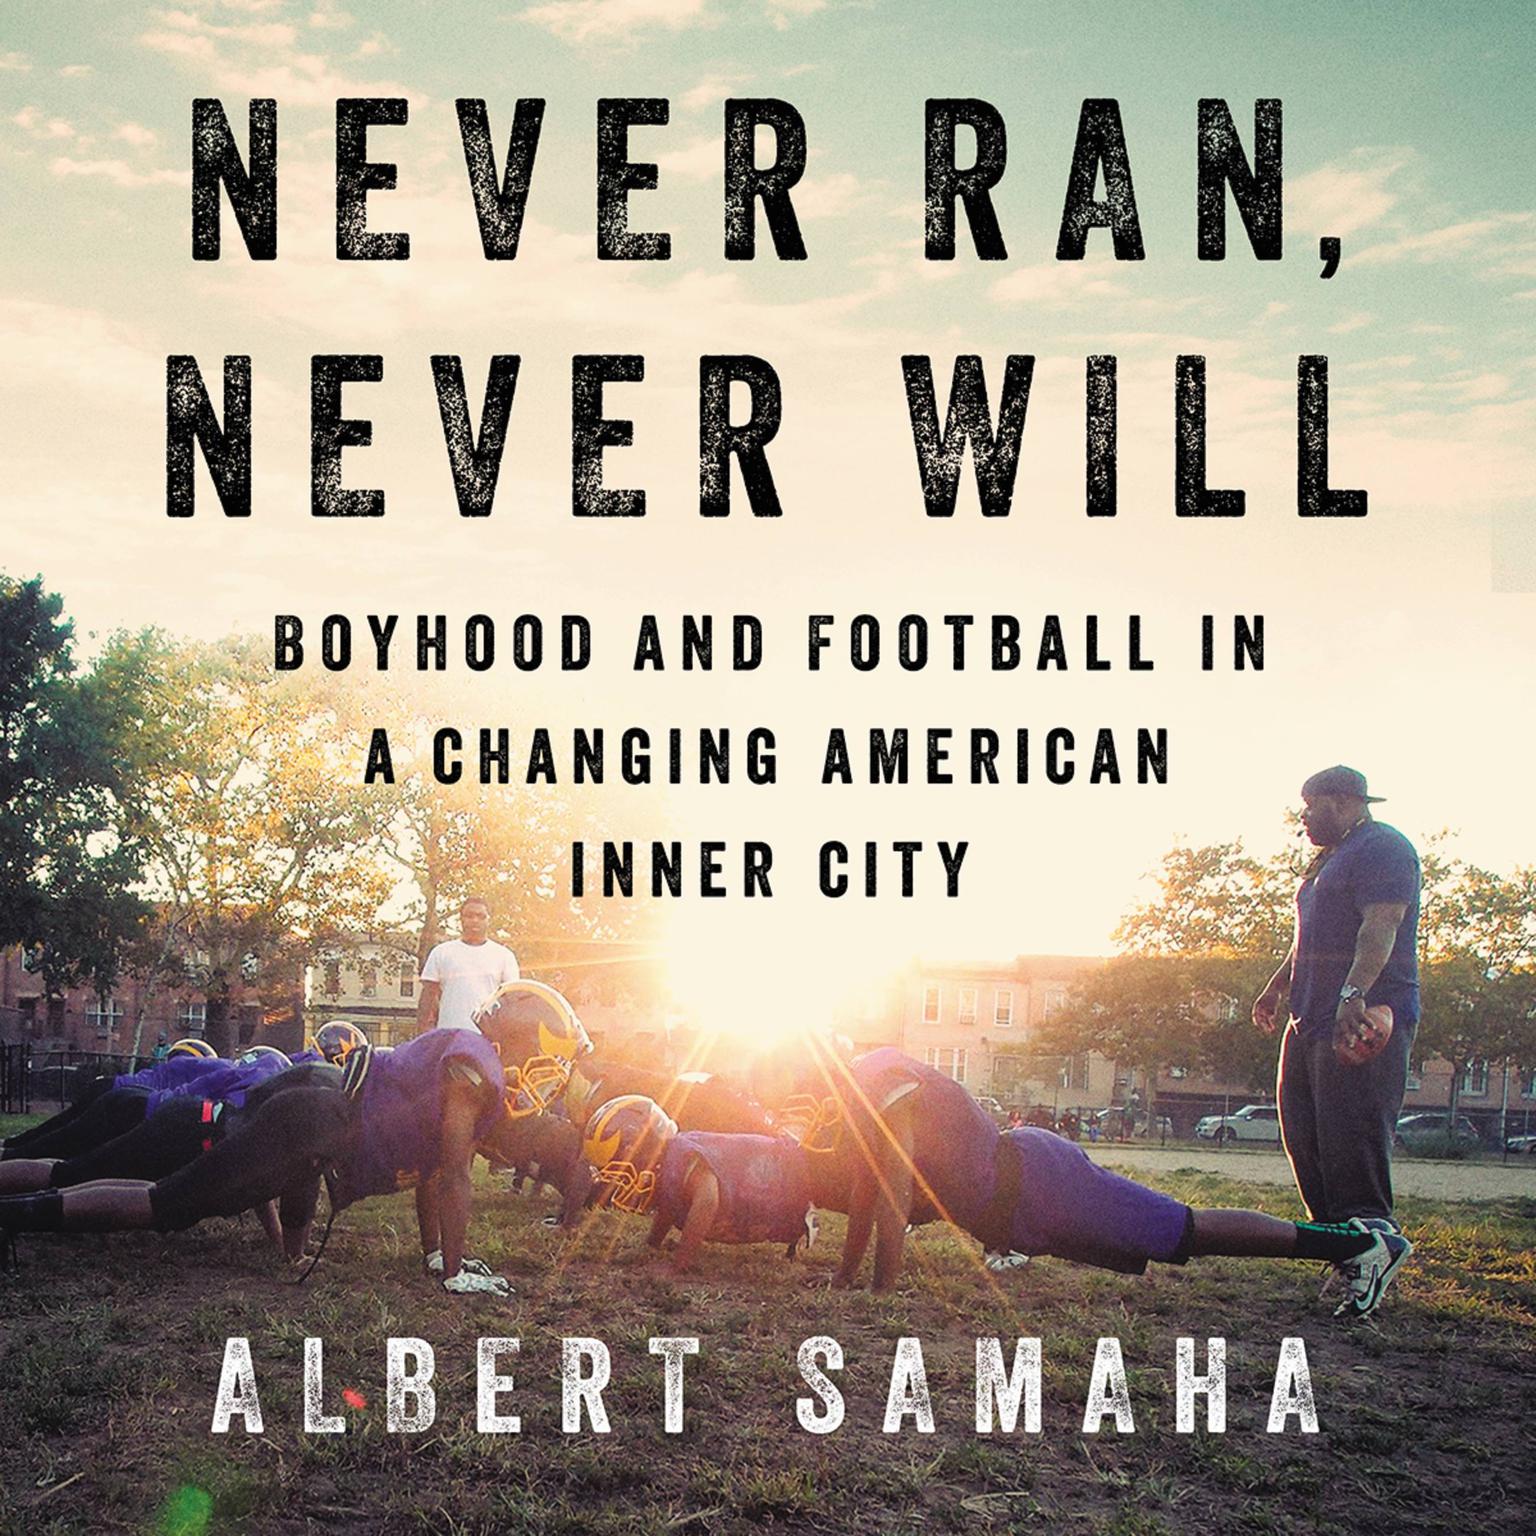 Never Ran, Never Will: Boyhood and Football in a Changing American Inner City Audiobook, by Albert Samaha